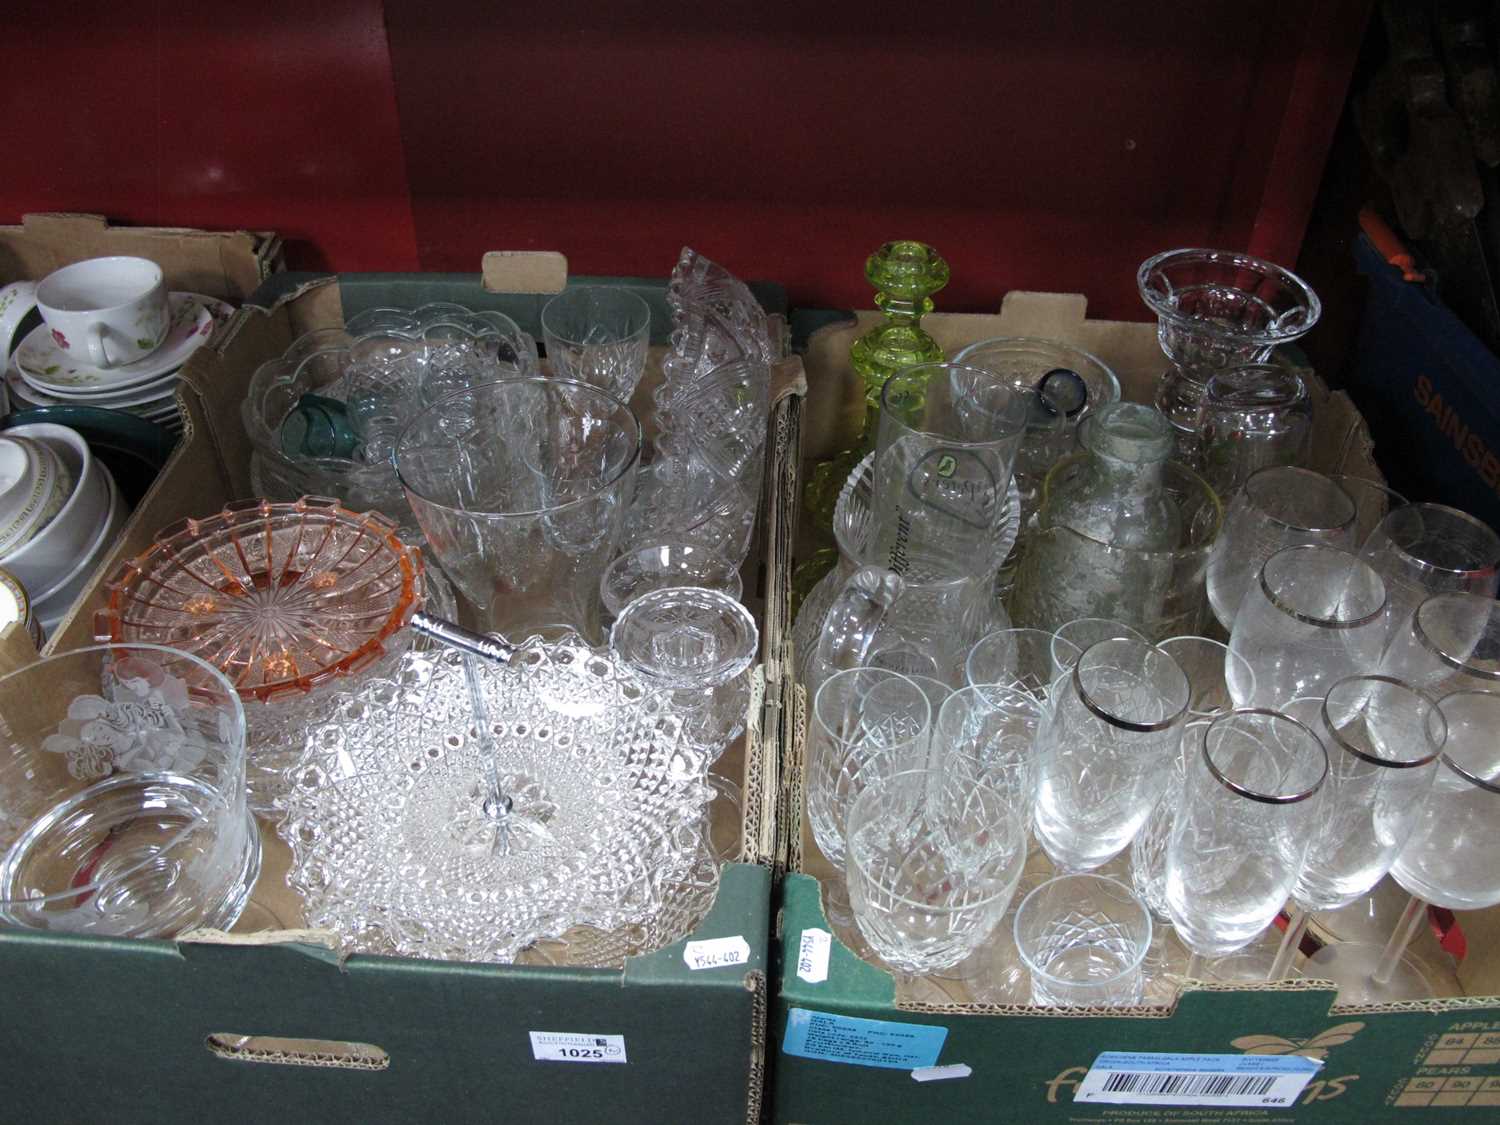 Glassware to include pair of vaseline cancelsticks, various bowls some cut glass, jugs, wine and